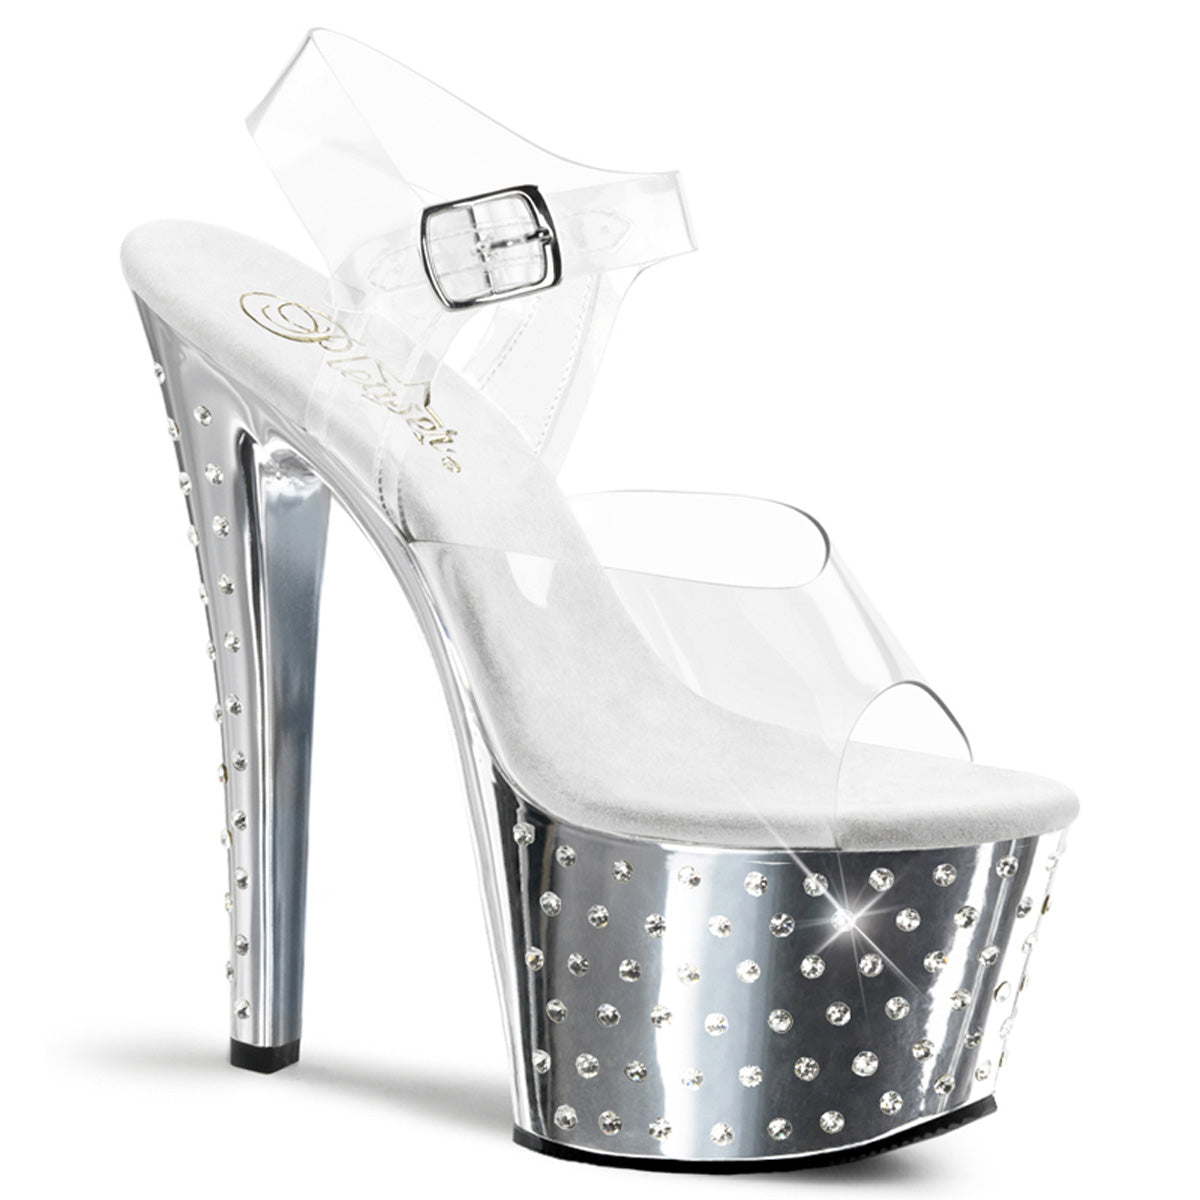 STARDUST-708 7 Inch Heel ClearSilver Chrome Bling Strippers Shoes